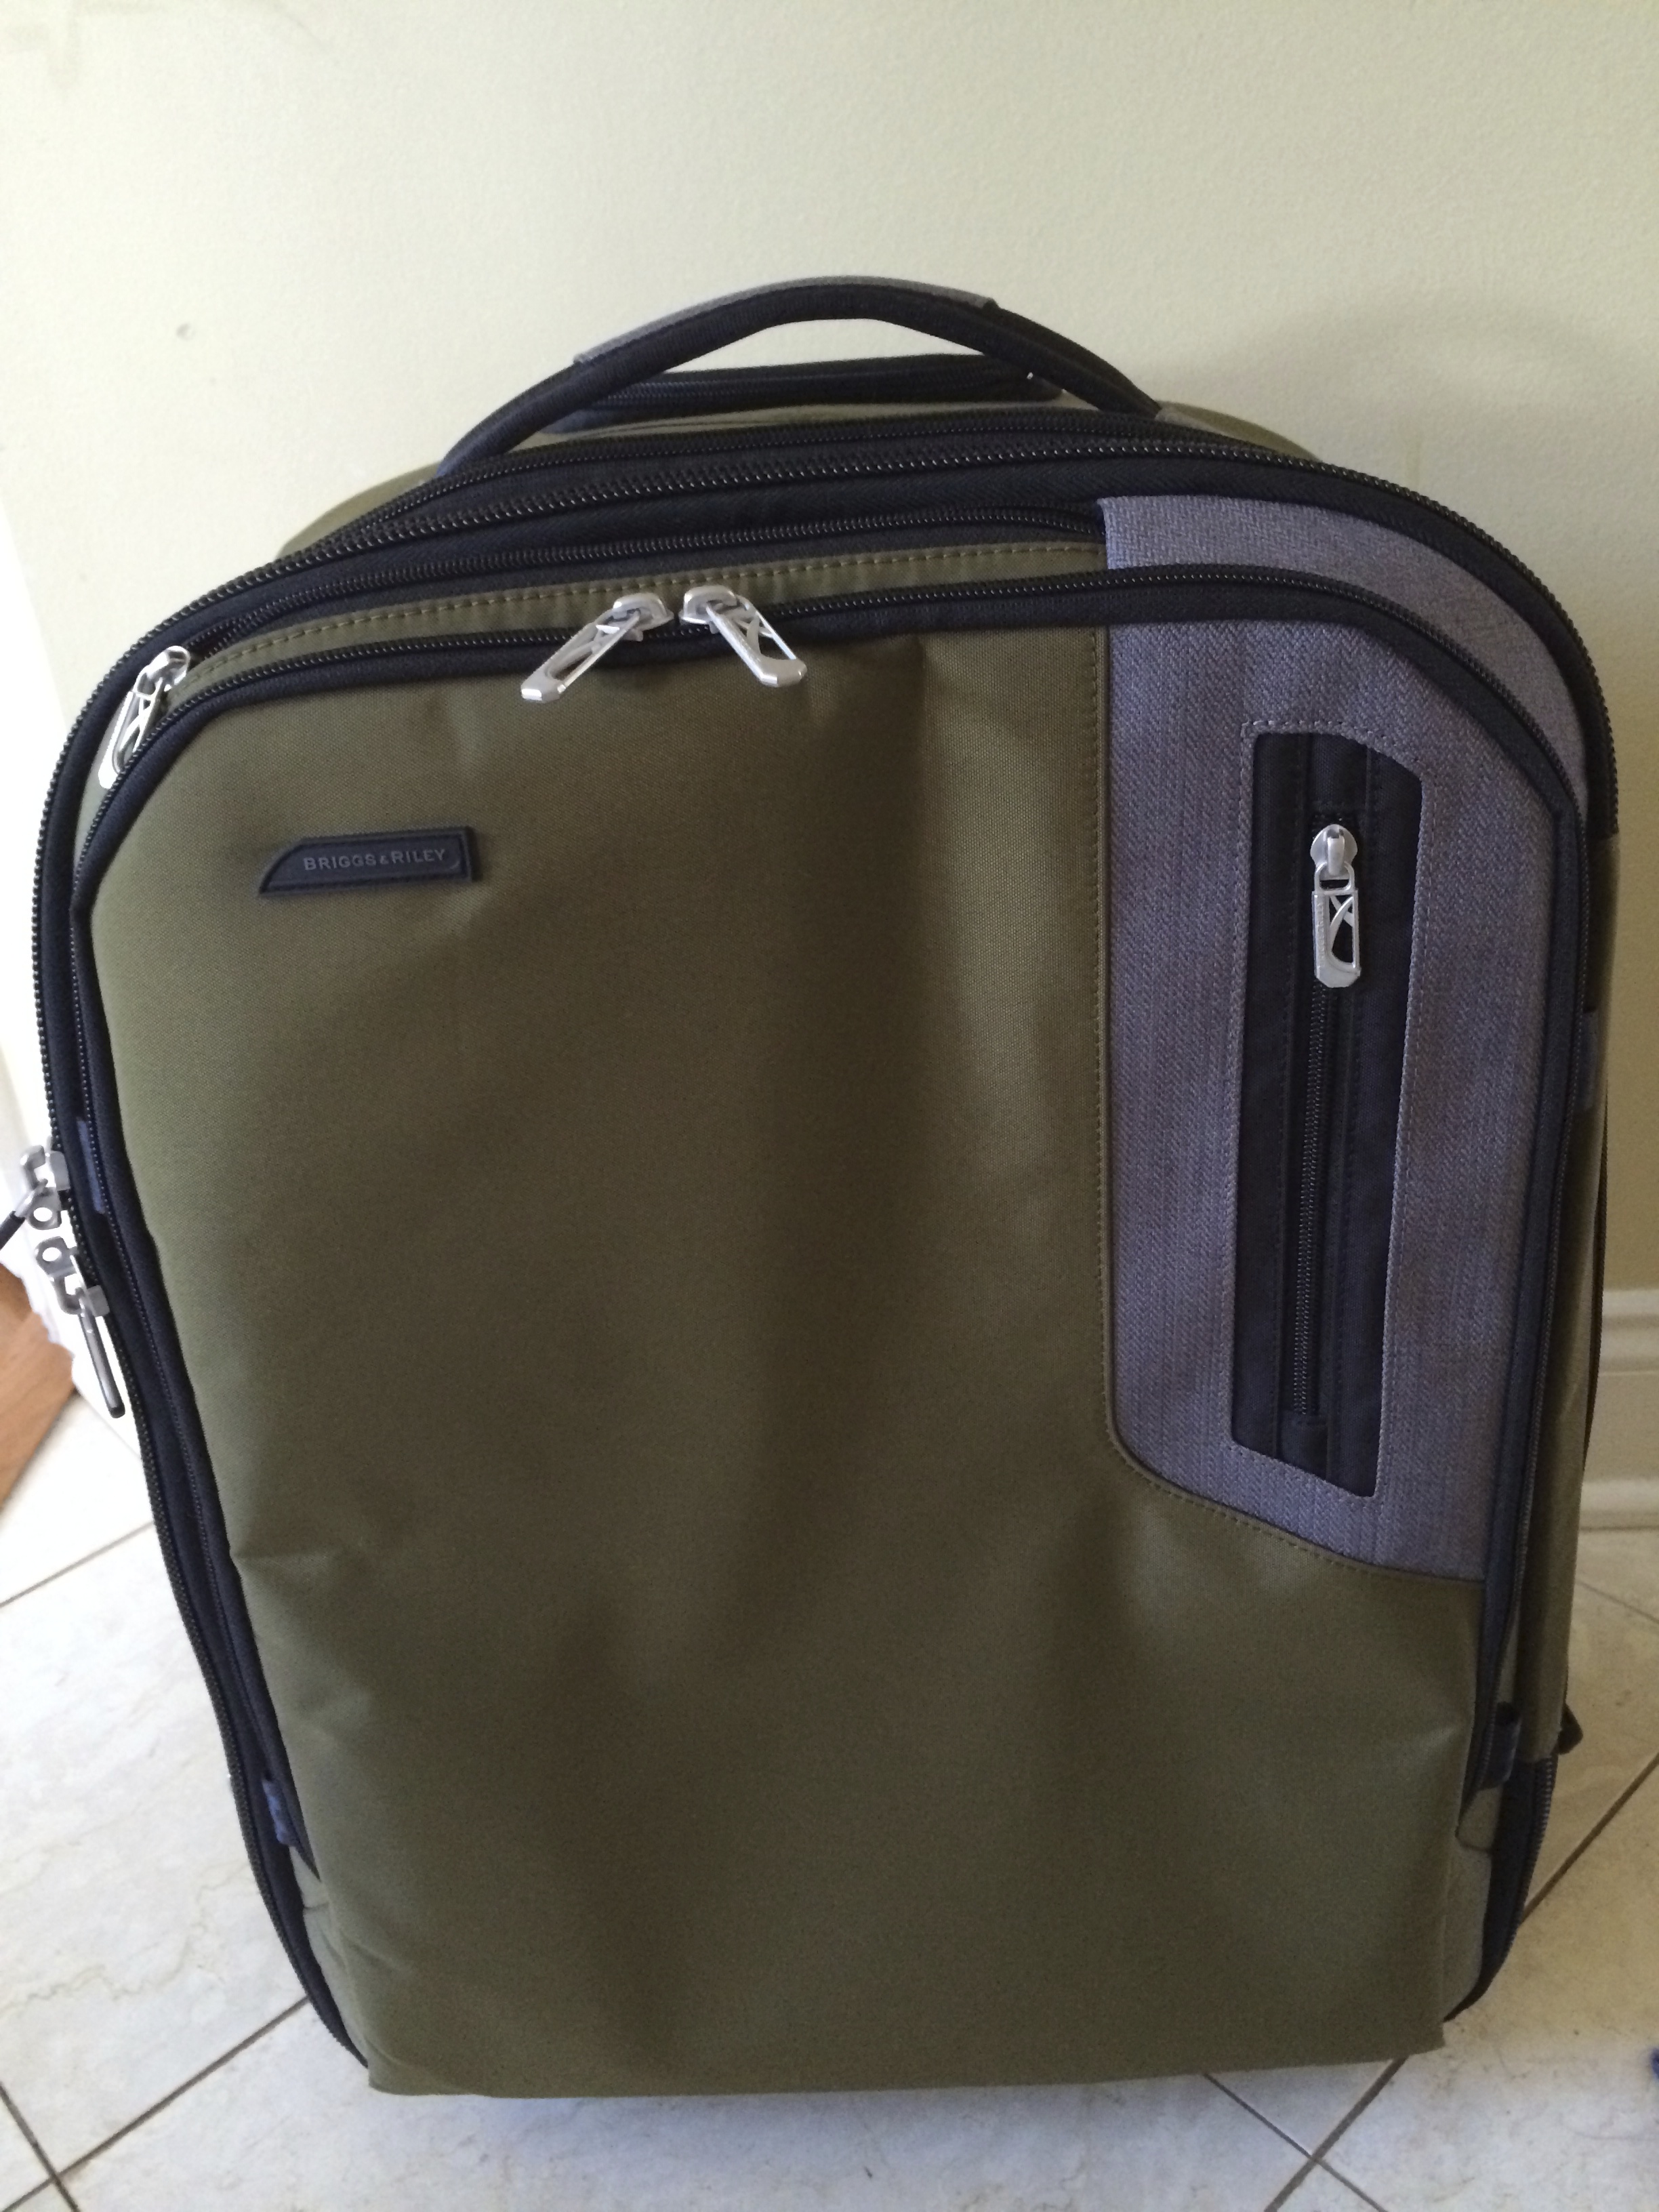 A First Look At The New Briggs & Riley BRX Rolling Carry-On